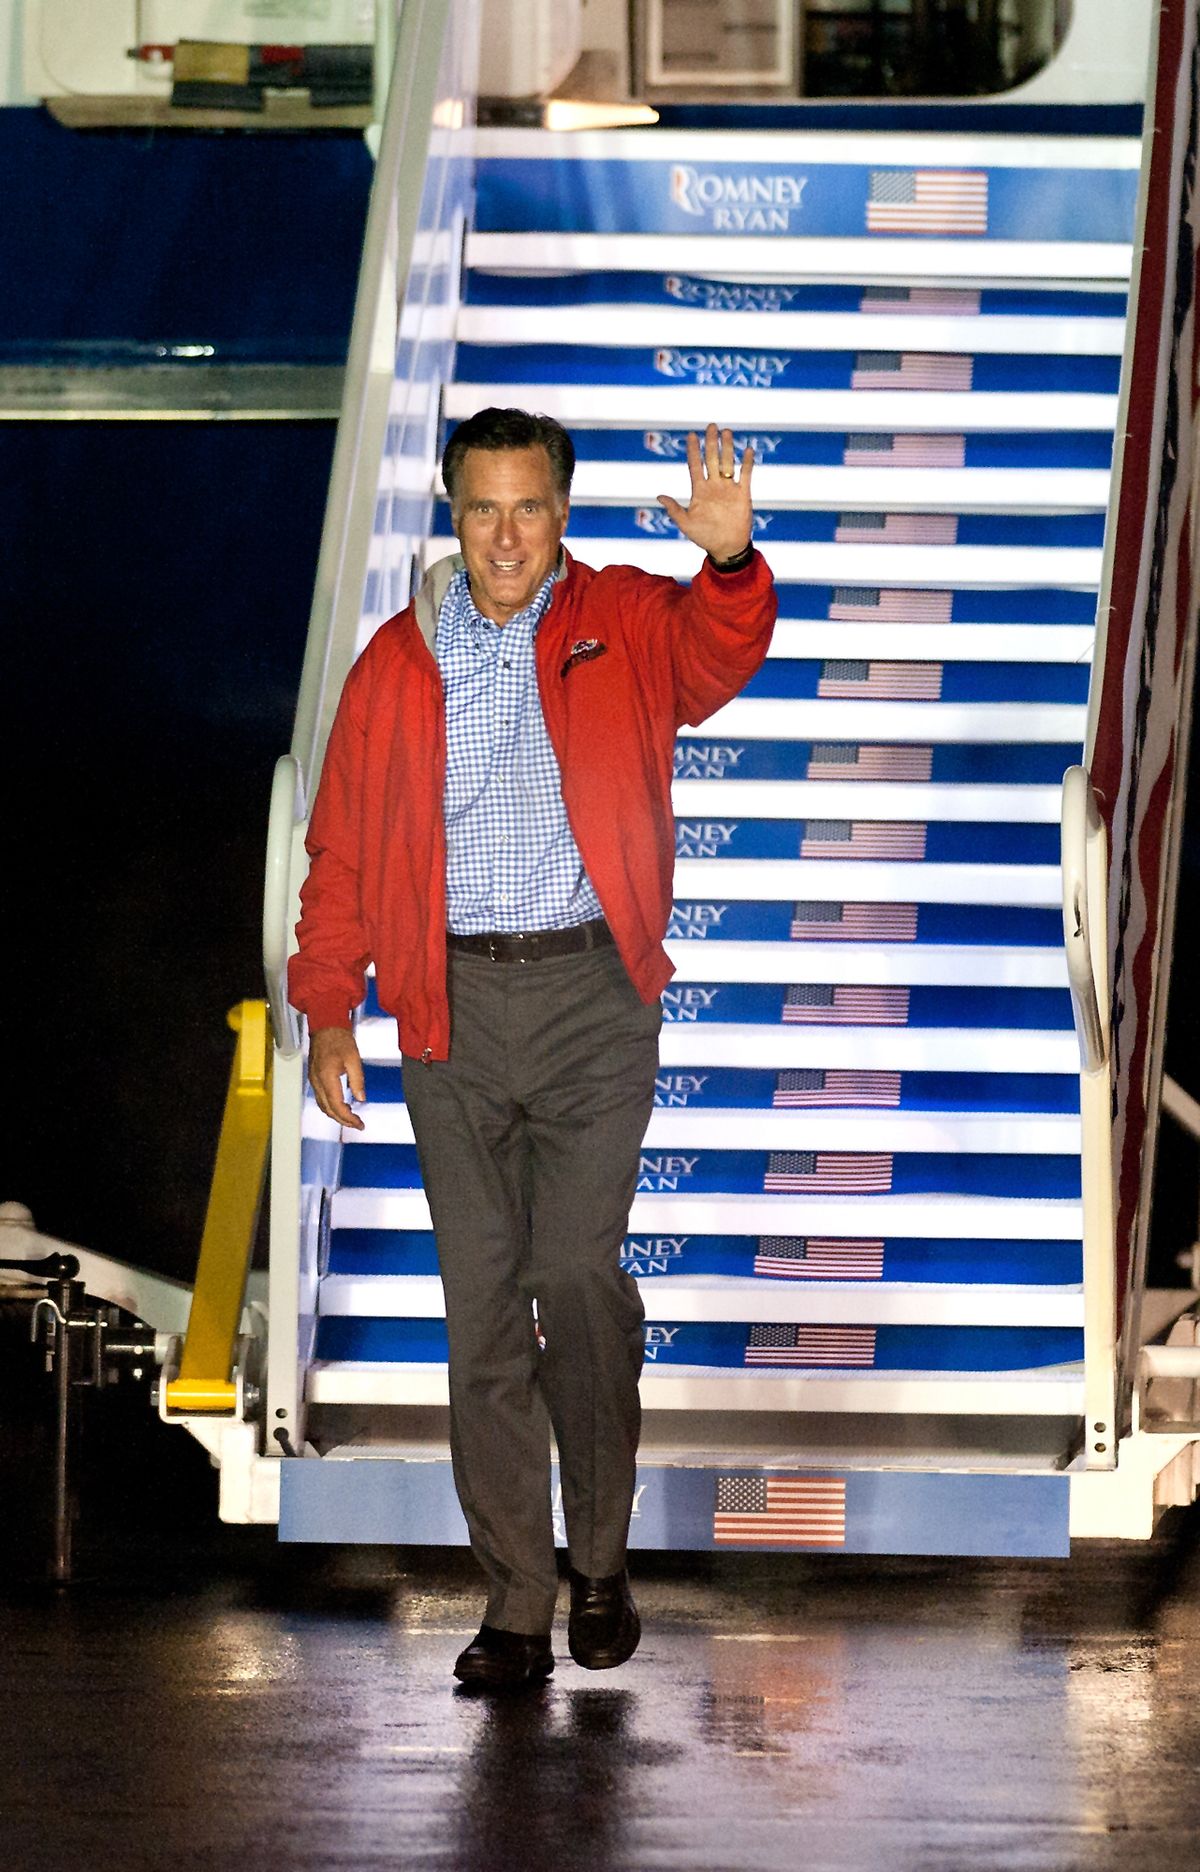 Republican presidential candidate, former Massachusetts Gov. Mitt Romney, waves towards a camera platform after exiting his MD-83 campaign plane at the Shenandoah Valley Regional Airport Sunday evening Oct. 7, 2012 in Weyers Cave, Va. Romney completed a three day campaign swing through Florida and will deliver a foreign policy address at the Virginia Military Institute in Lexington Monday. (Michael Reilly / Daily News-record)